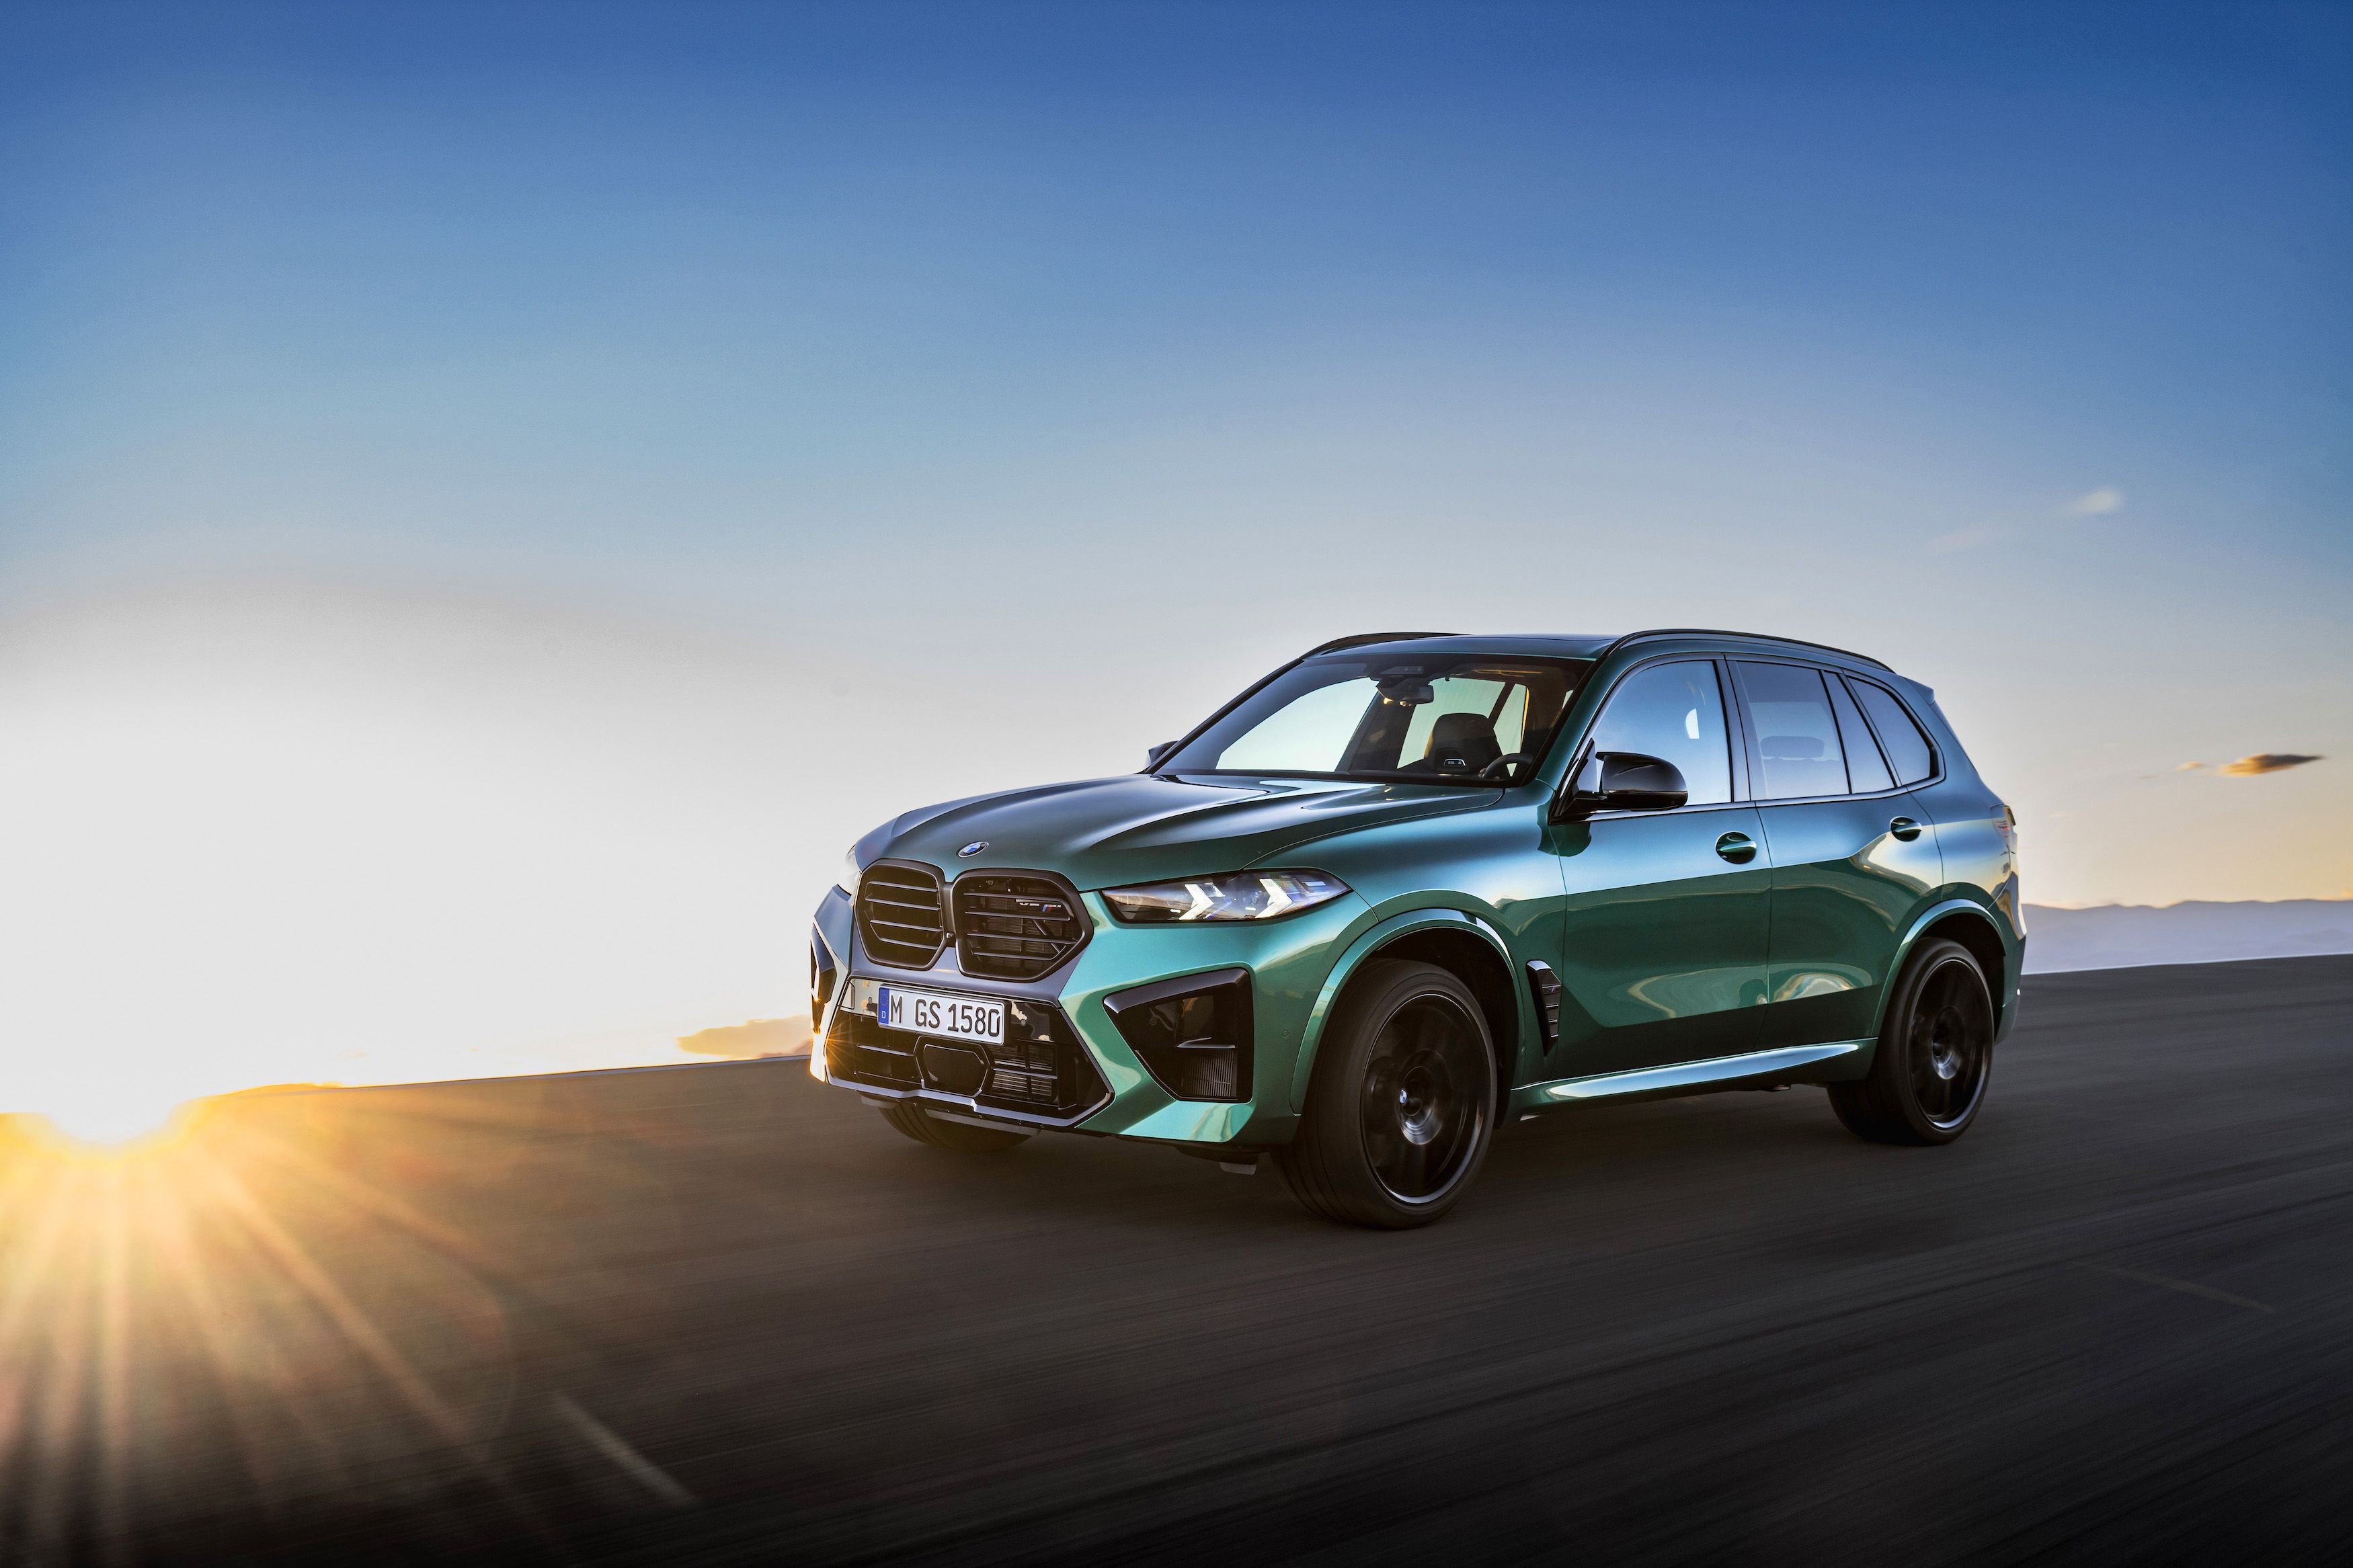 Bmw X5 M And X6 Petition Photos From Every Angle